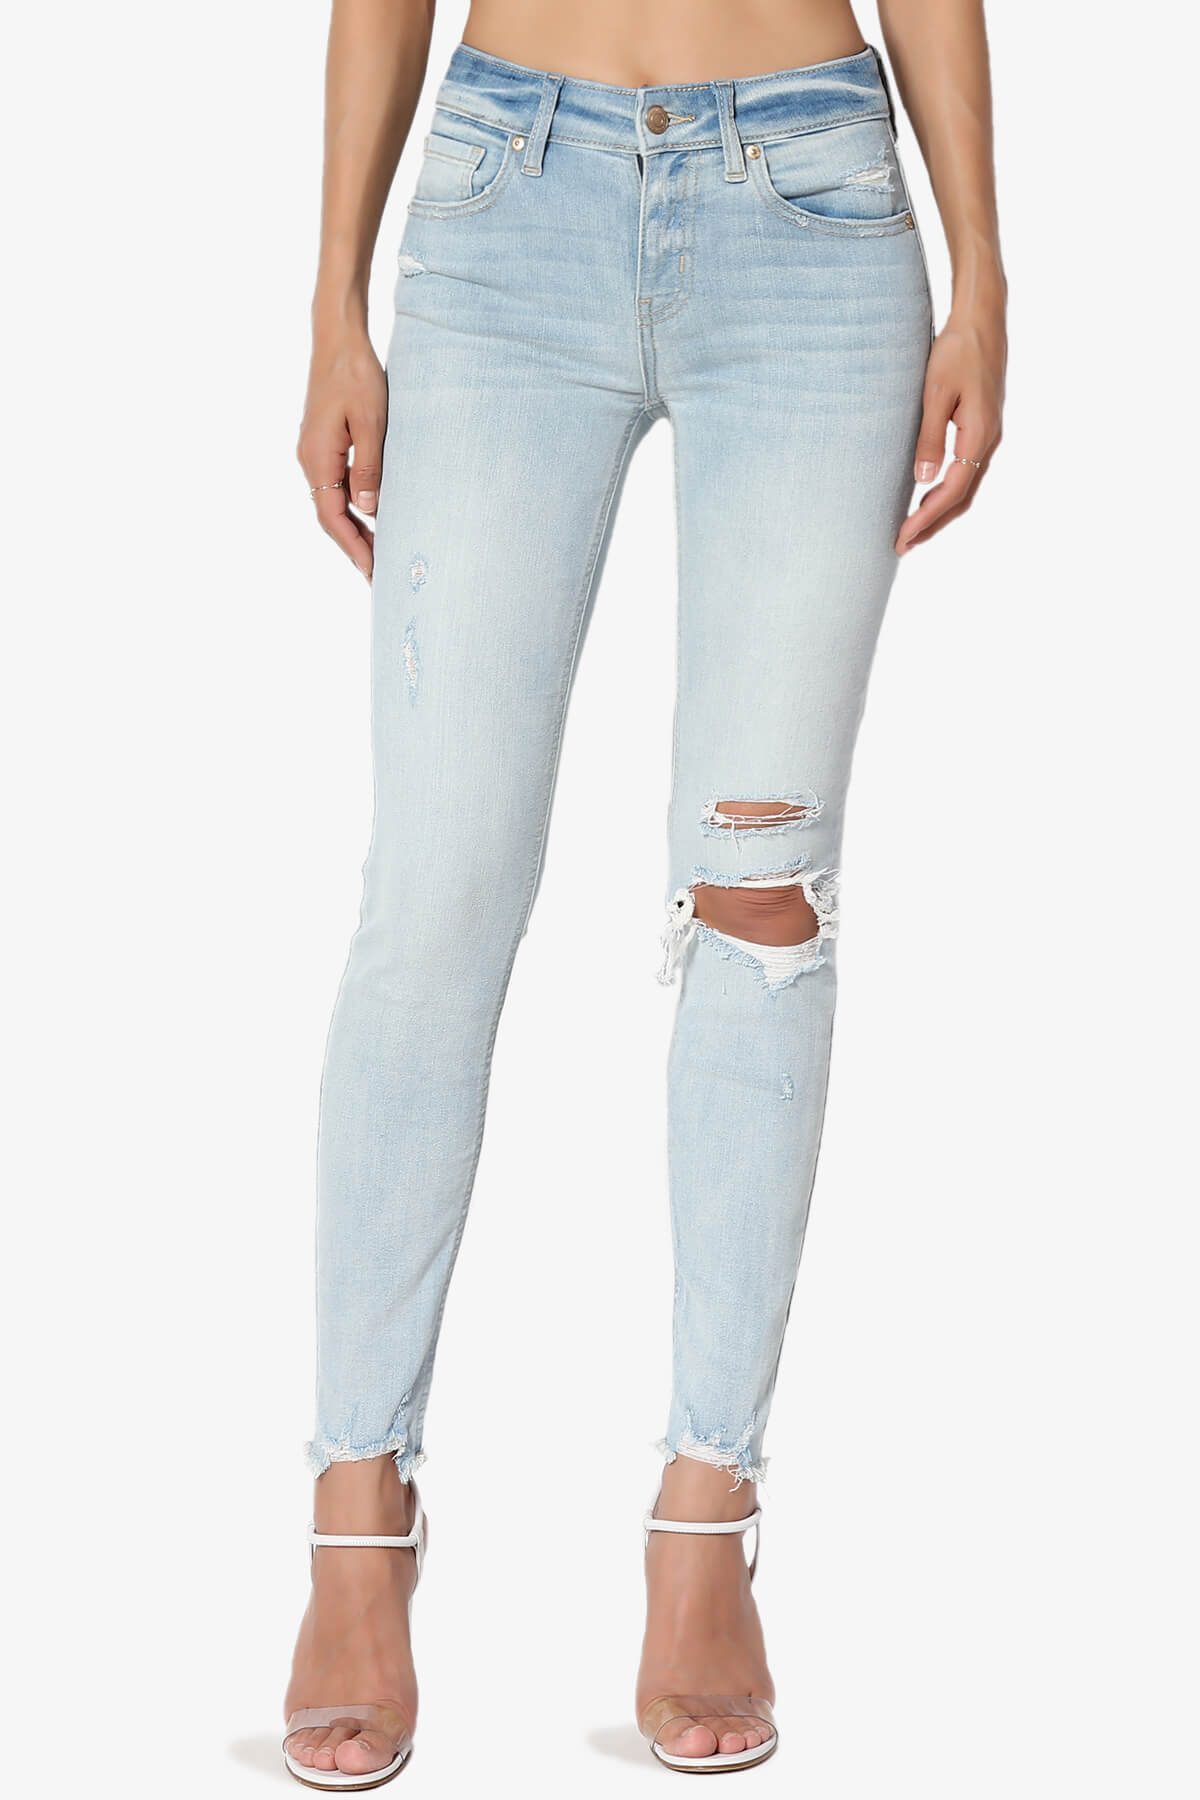 Josie Mid Rise Skinny Jeans in Cold Blooded LT LIGHT_1